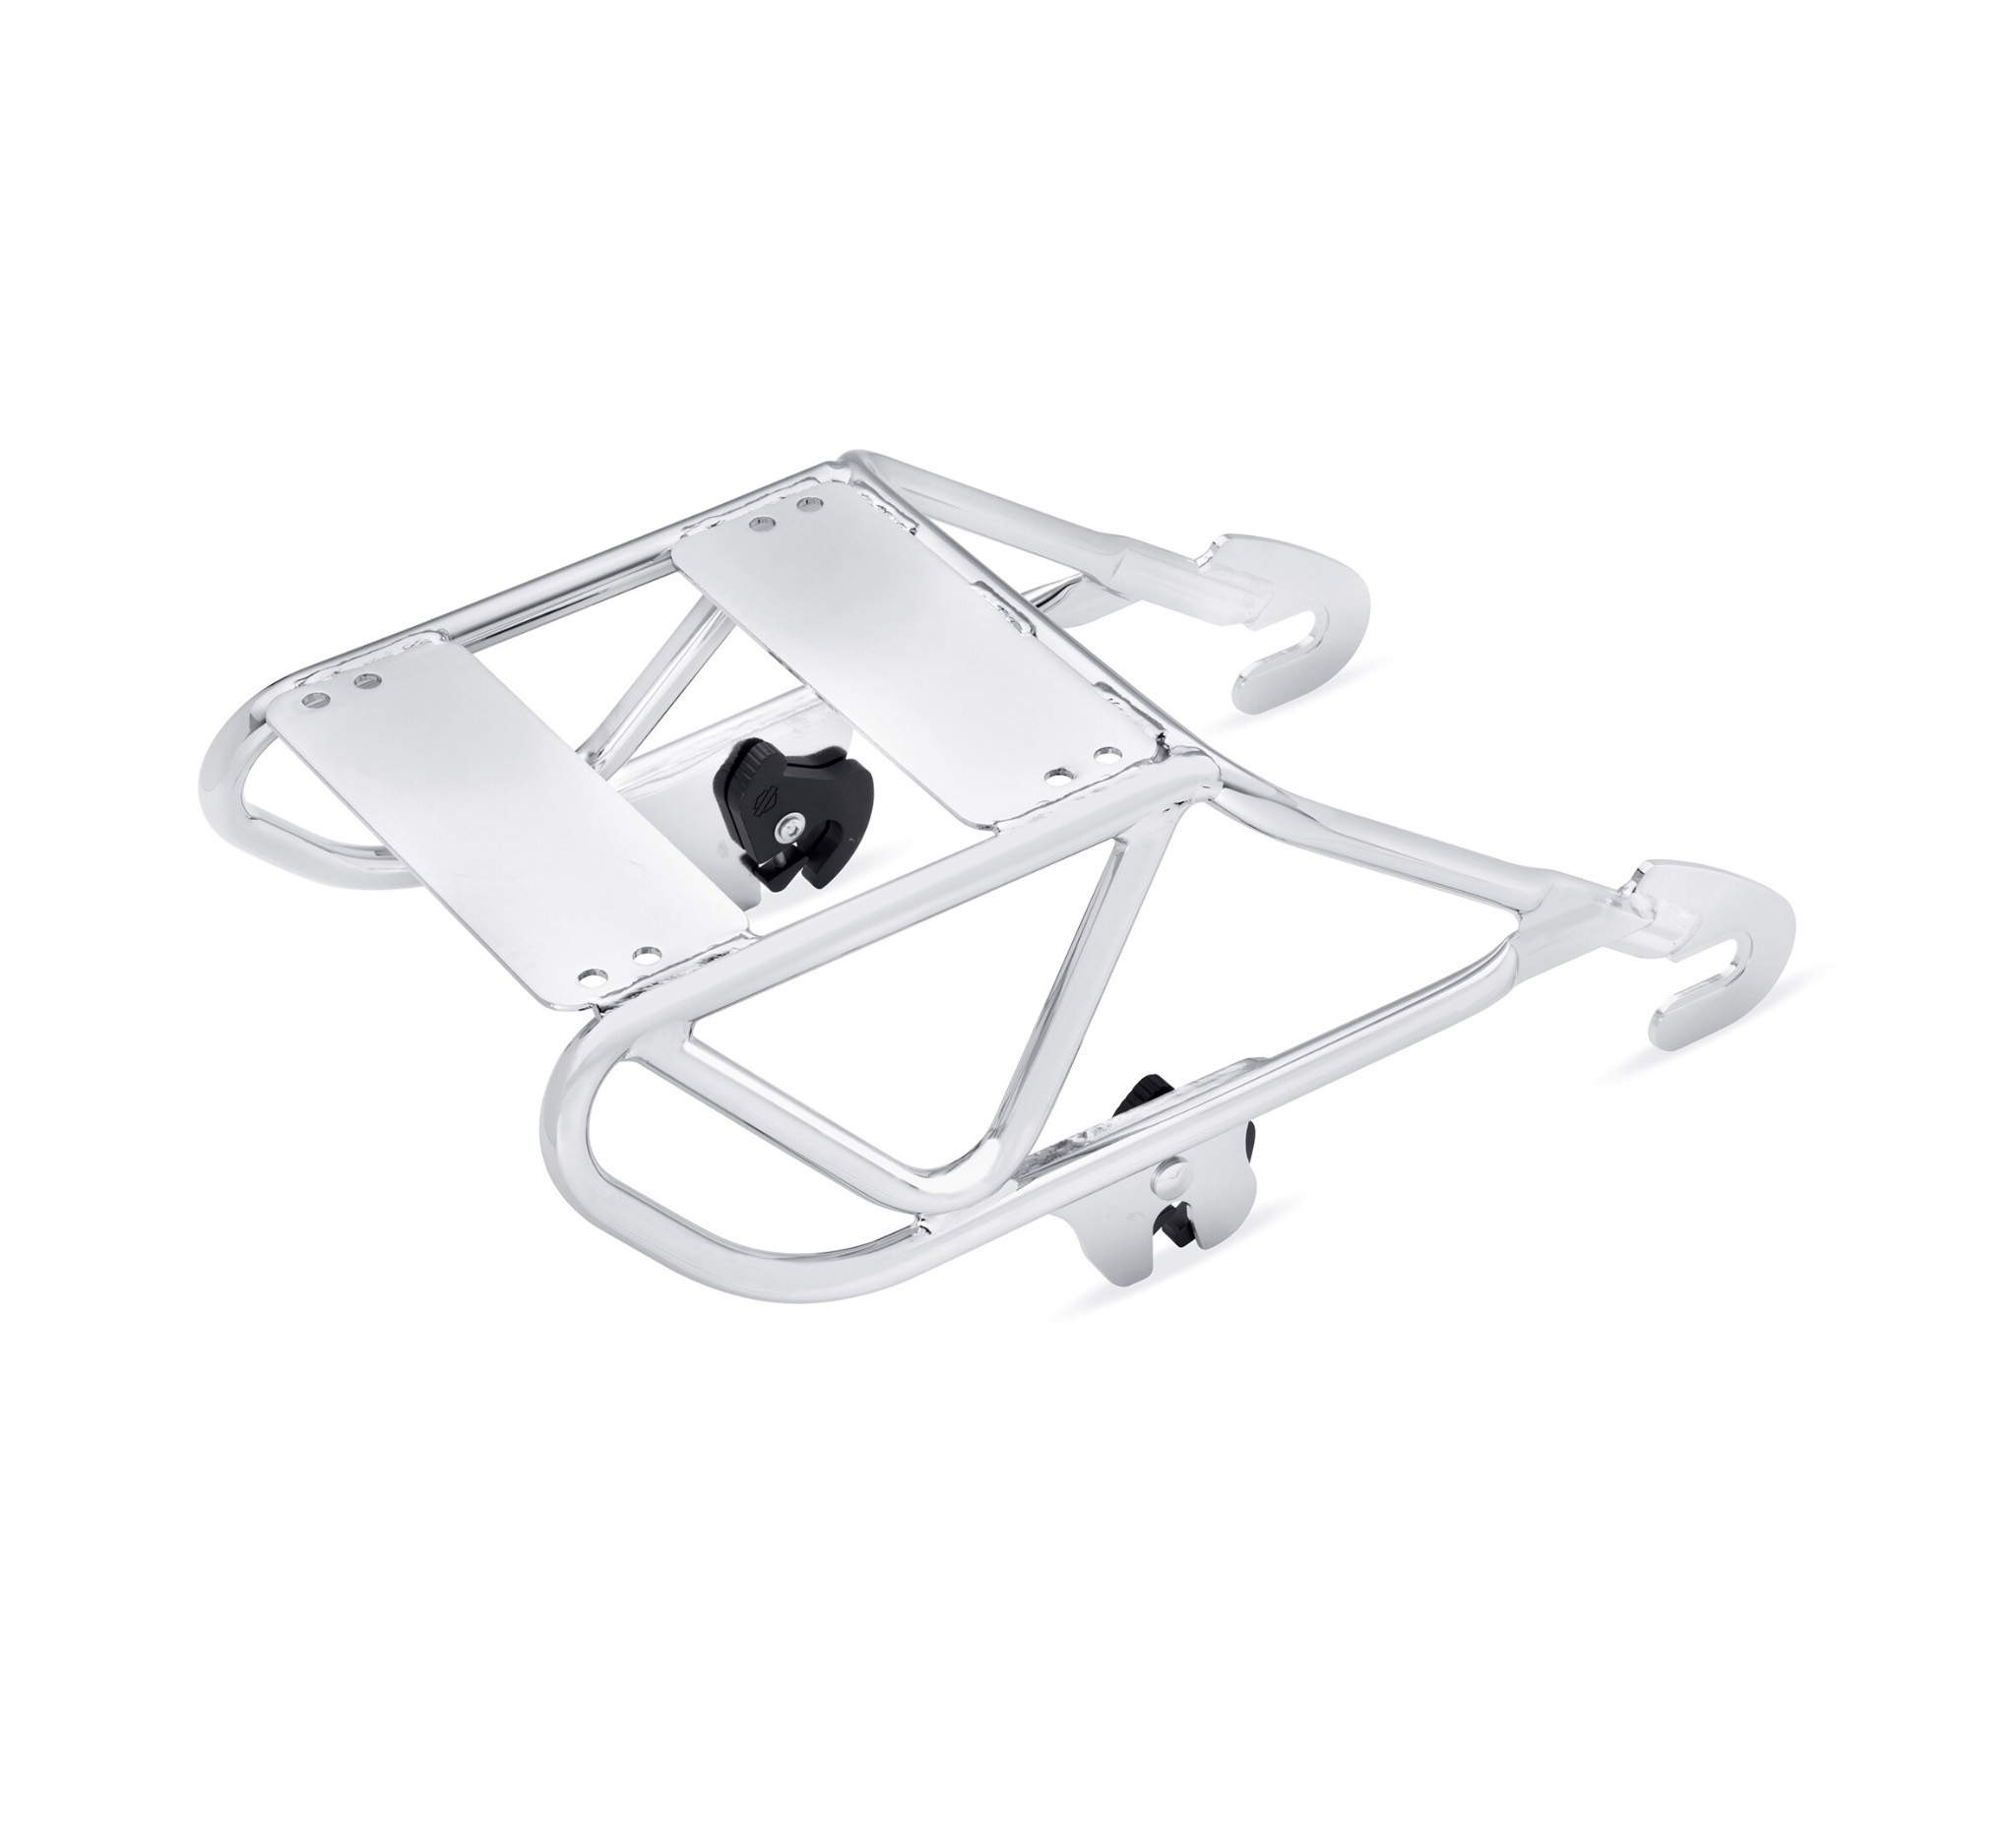 Chrome Detachable Two Up Tour Pak Mounting Rack Mount Pack & 4-Point for Harley Davidson Touring like Street Glide Road King Trunk Box Quick Release ref 53276-09B ref 54205-09A 